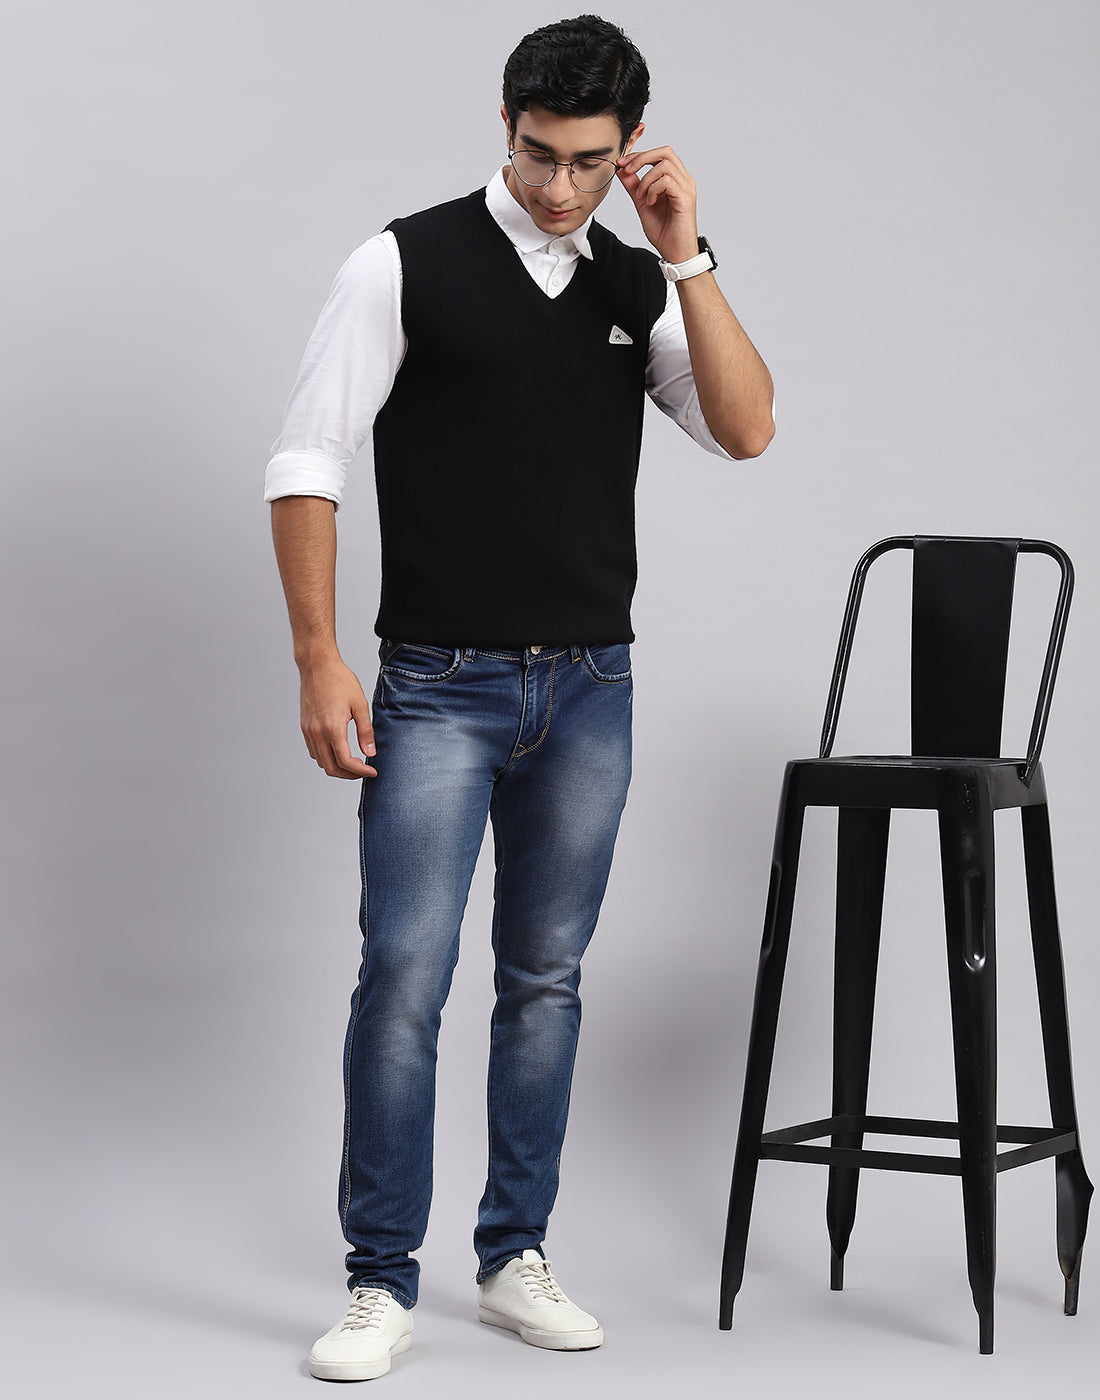 Men Black Solid V Neck Sleeveless Sweaters/Pullovers